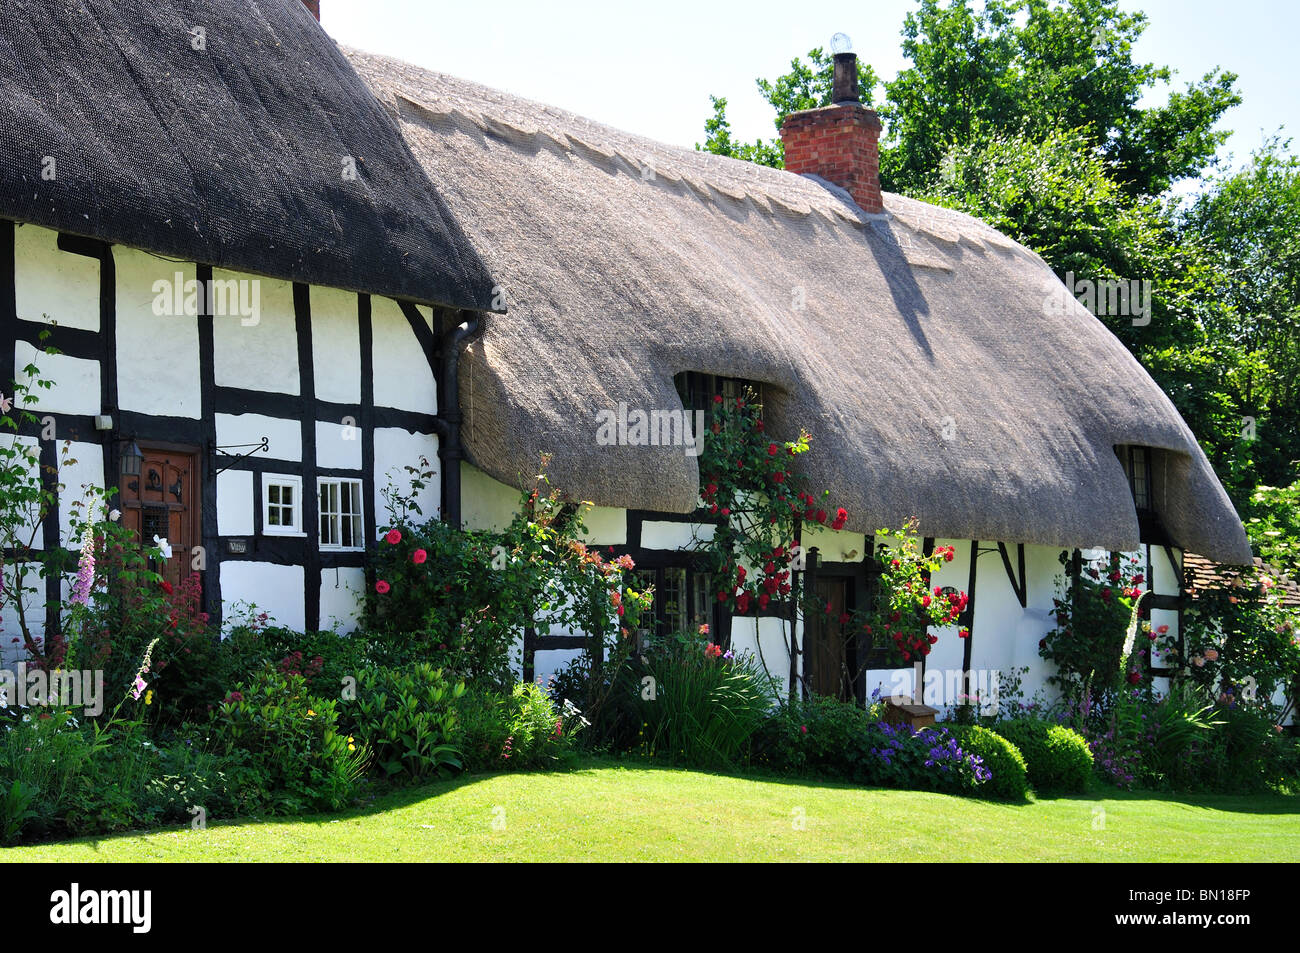 Thatched cottages, Welford-on-Avon, Warwickshire, England, United Kingdom Stock Photo